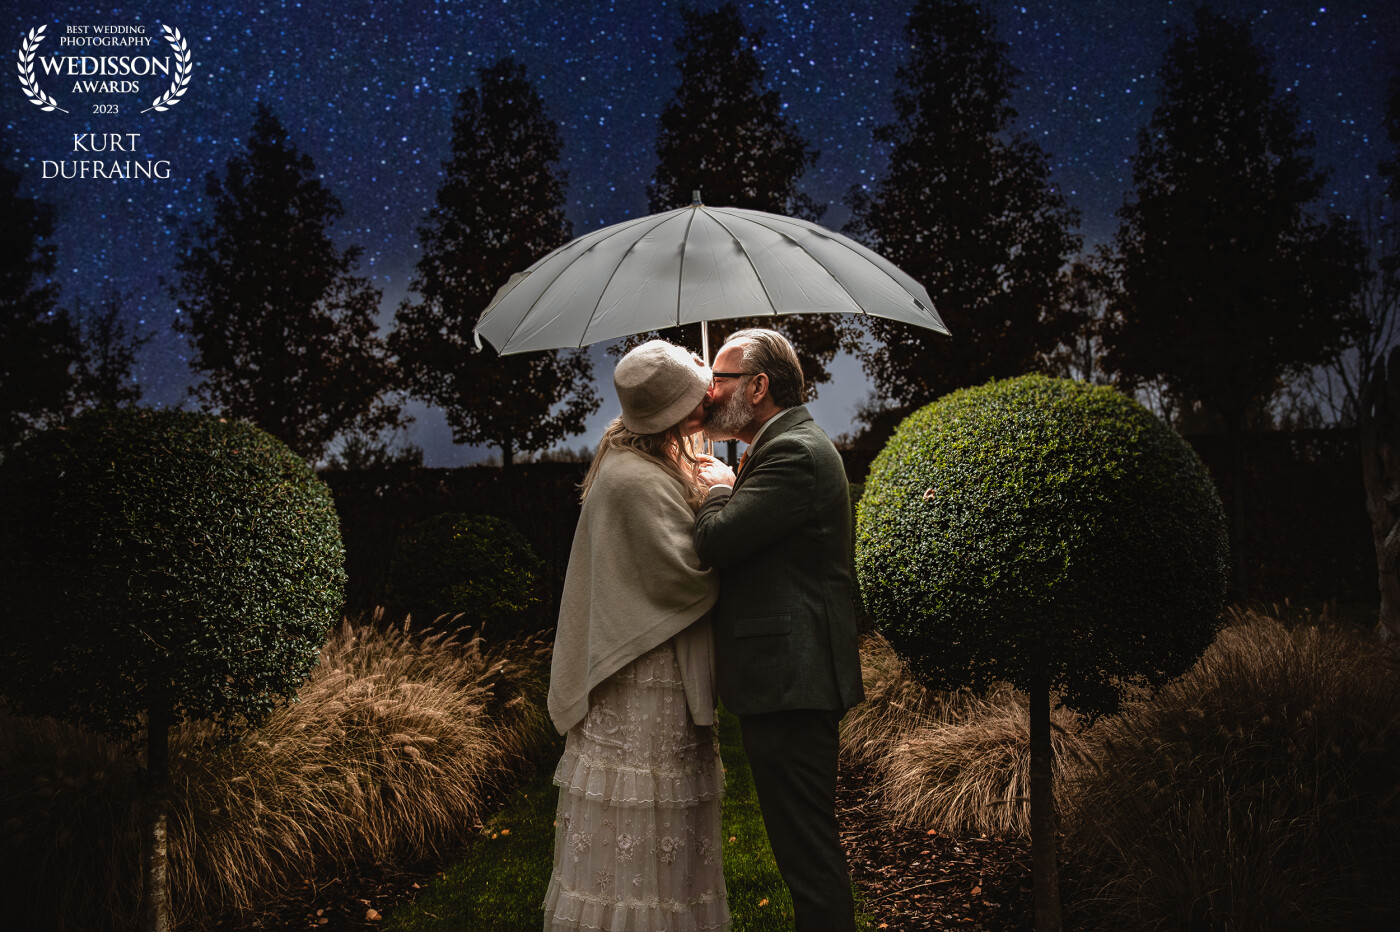 This beautiful couple has their own story... They got married in the fall, and as a photographer I wanted to capture their warm love against the cold environment. It resulted in an intimate, pure image that typifies them beautifully